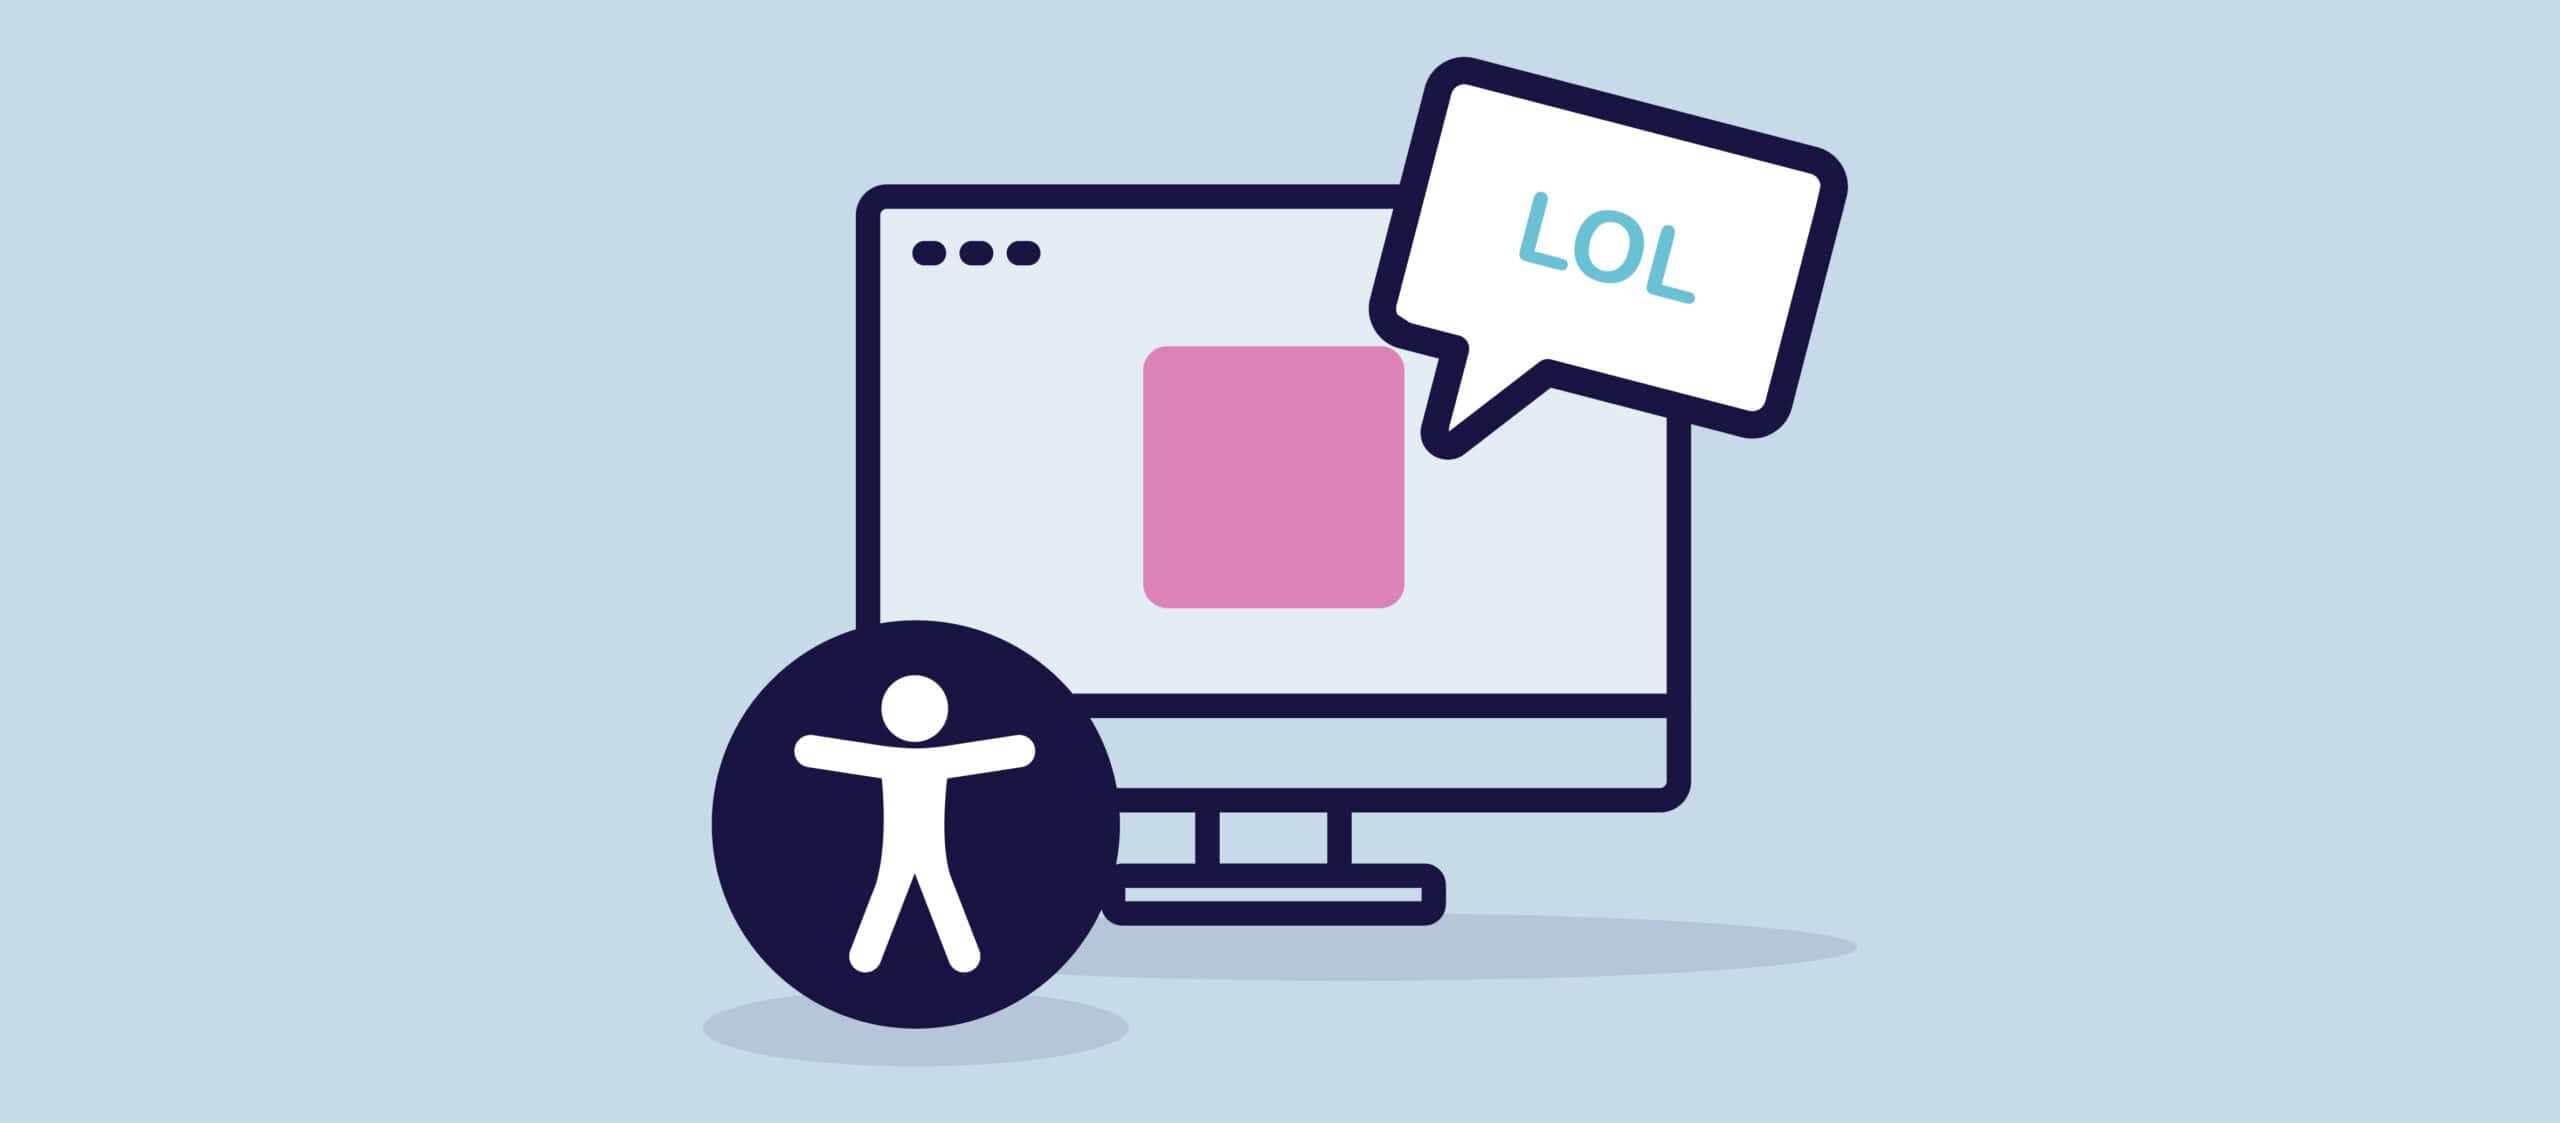 An illustration of a computer screen with a pink square on the screen representing a meme. Coming out of the meme is a speech bubble with the text, "LOL". To the left of the screen is the universal accessibility symbol.